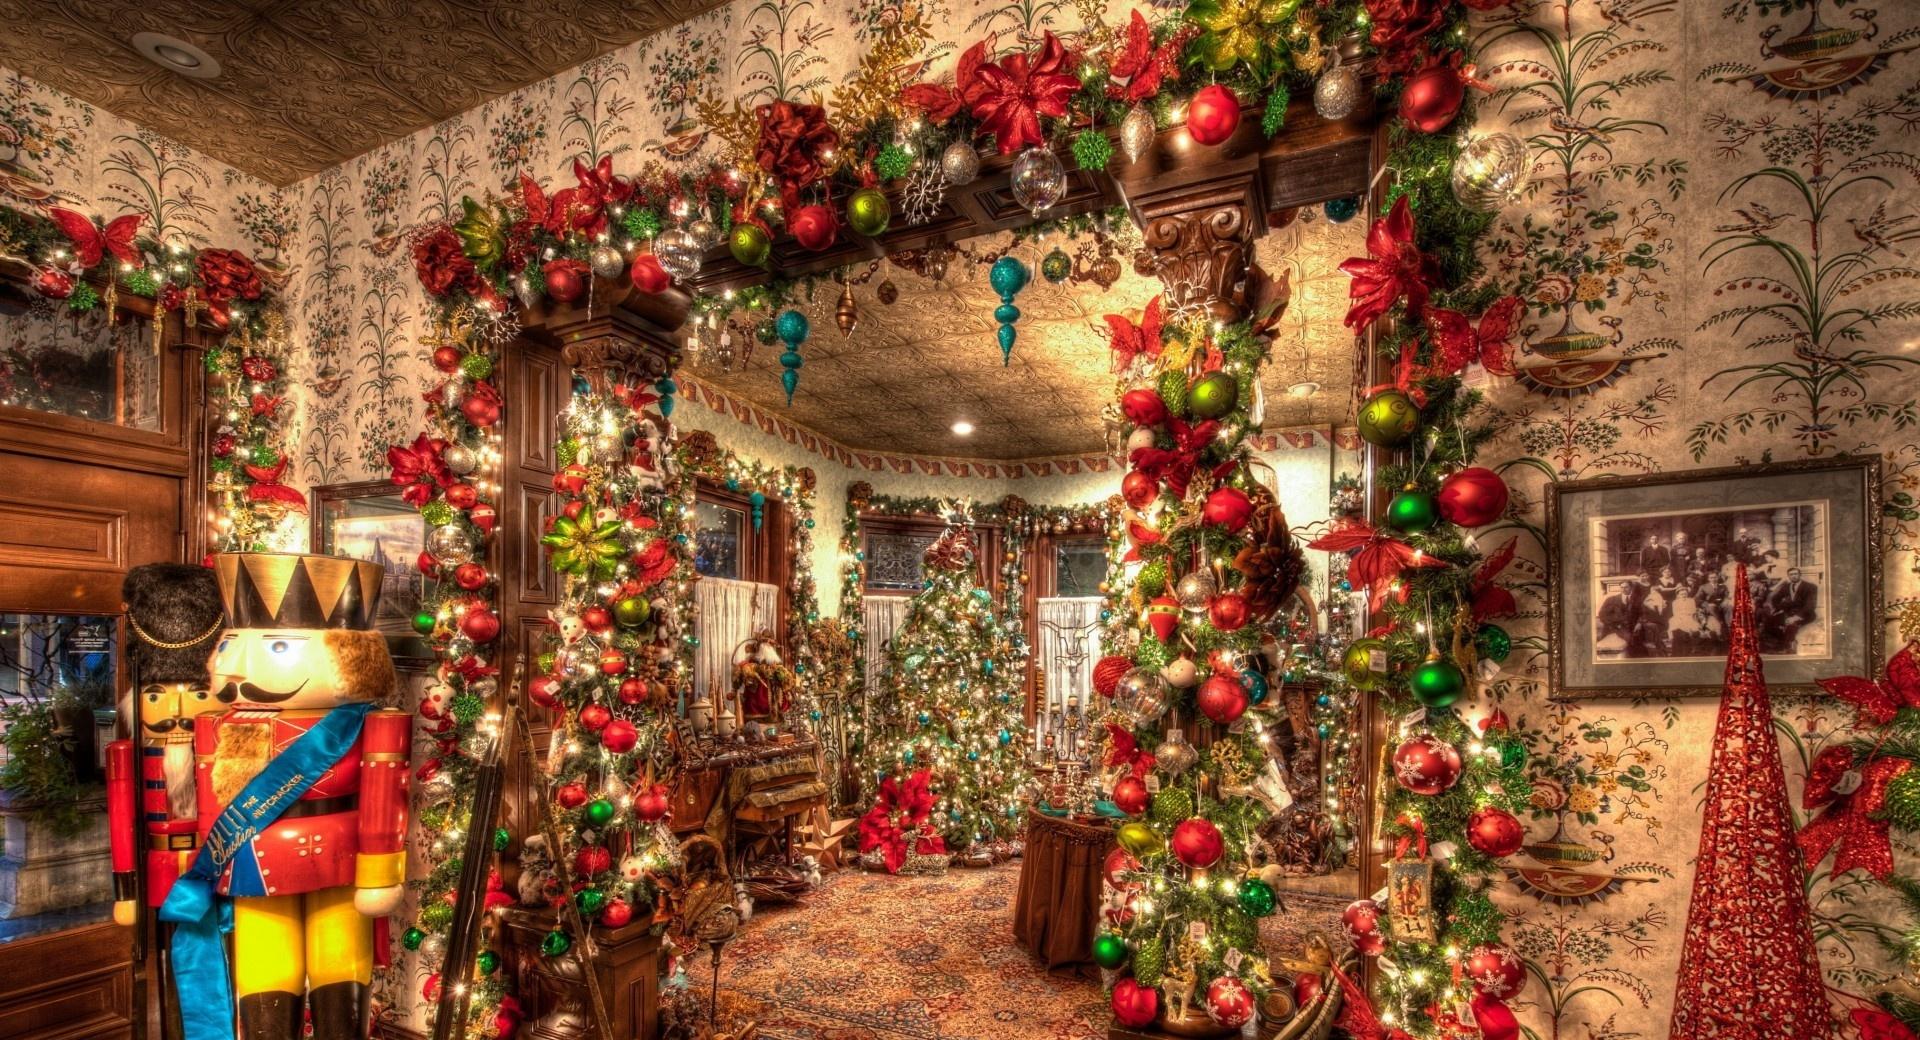 Christmas House Decorations Inside wallpapers HD quality